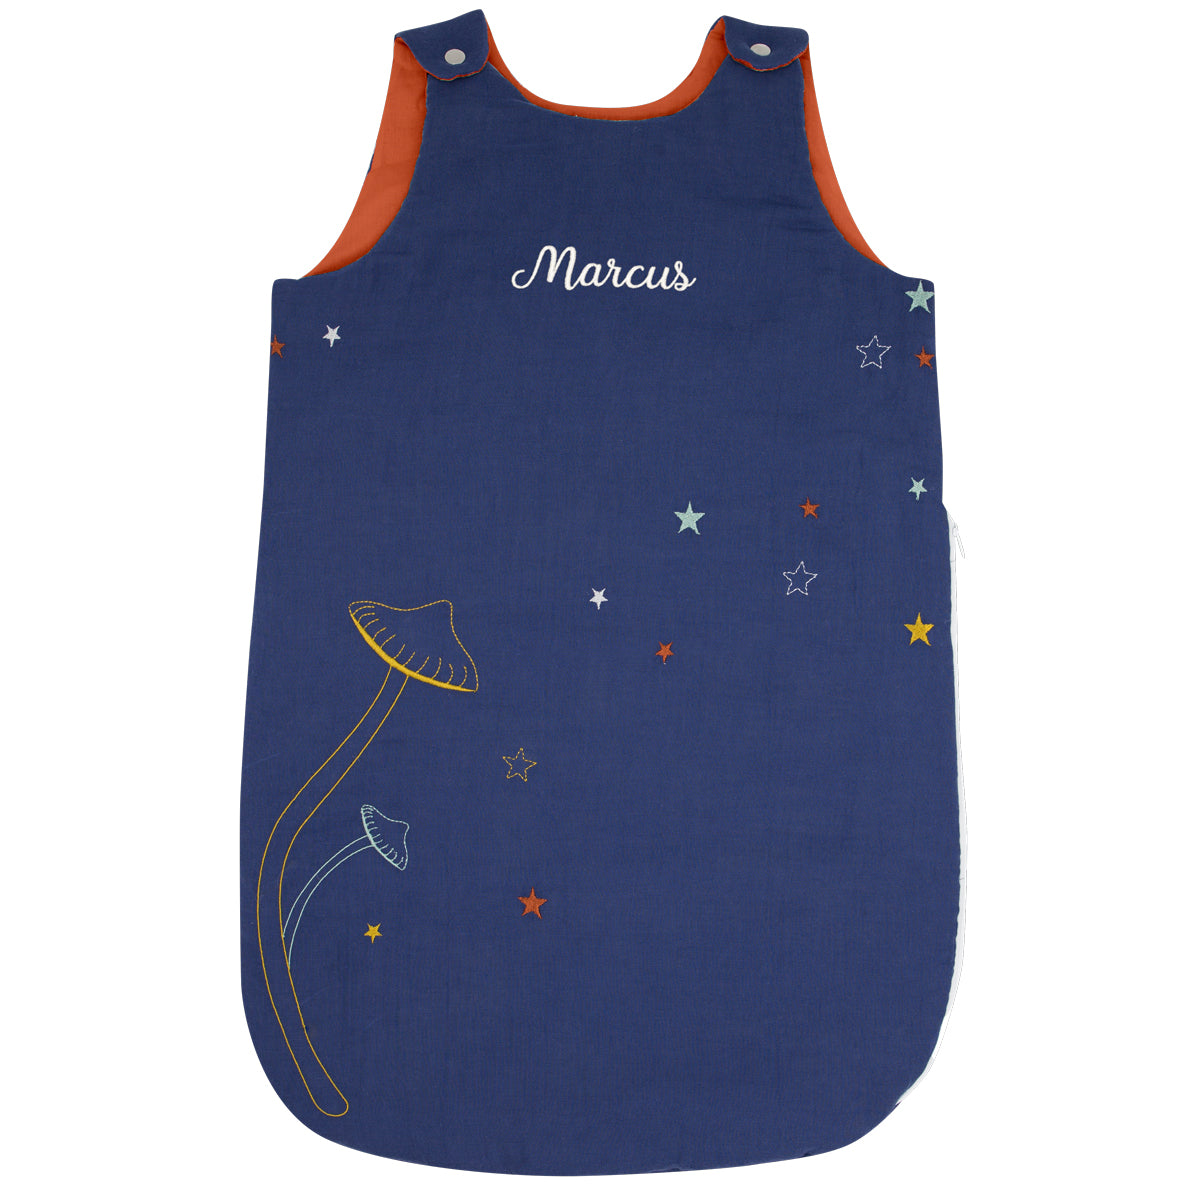 Personalized sleeping bag for baby - Midnight Blue